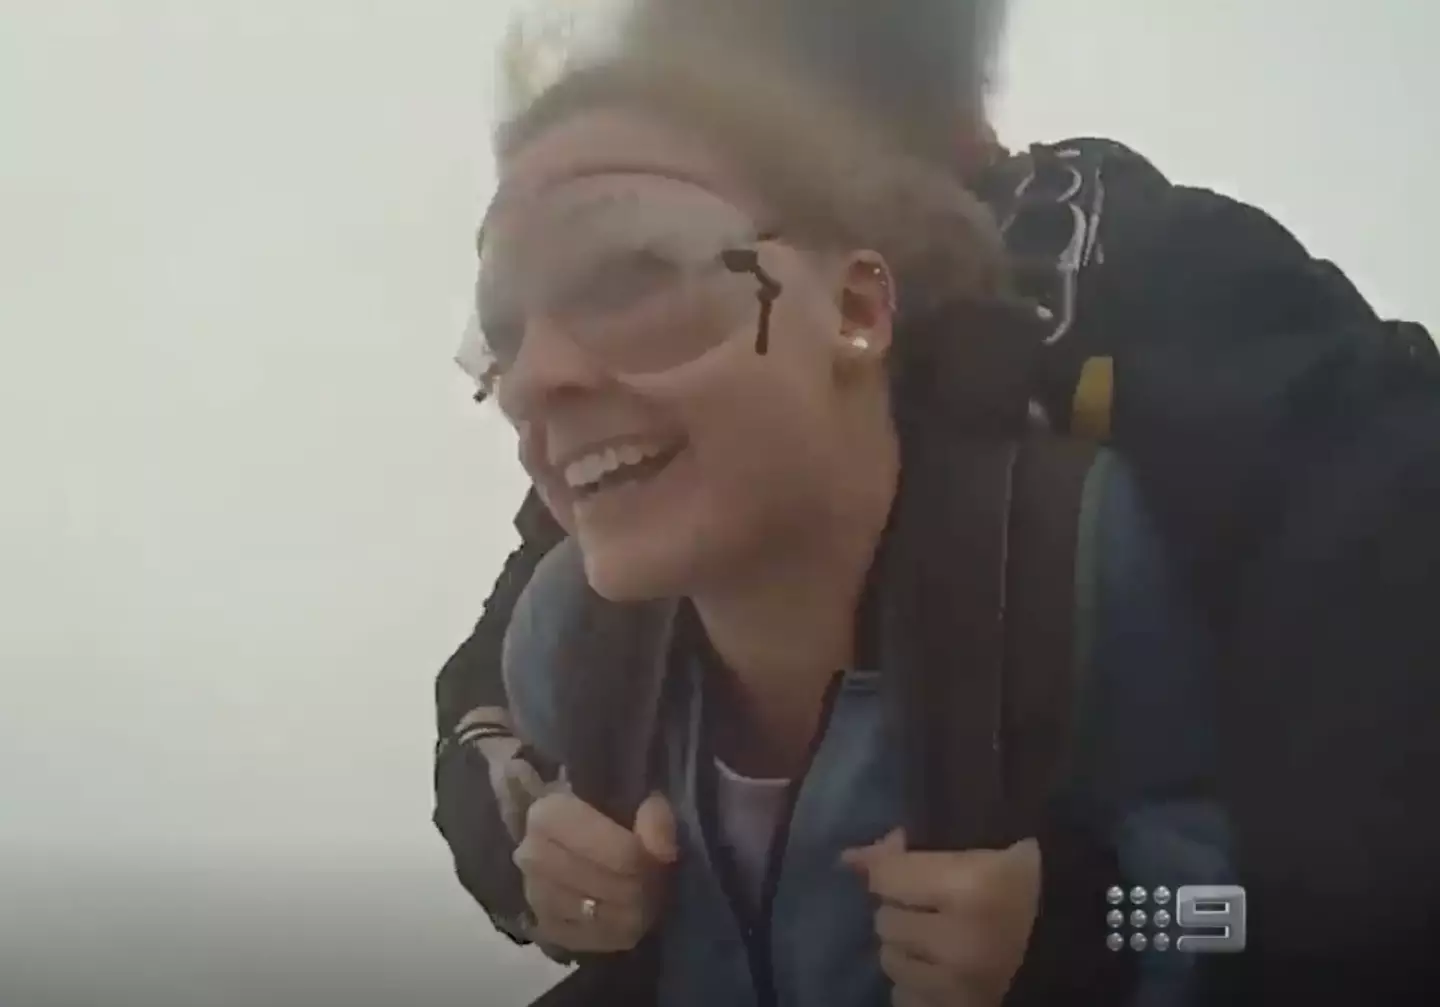 Emma Carey went skydiving in the Swiss Alps when her parachute became tangled. (A Current Affair/9 News)